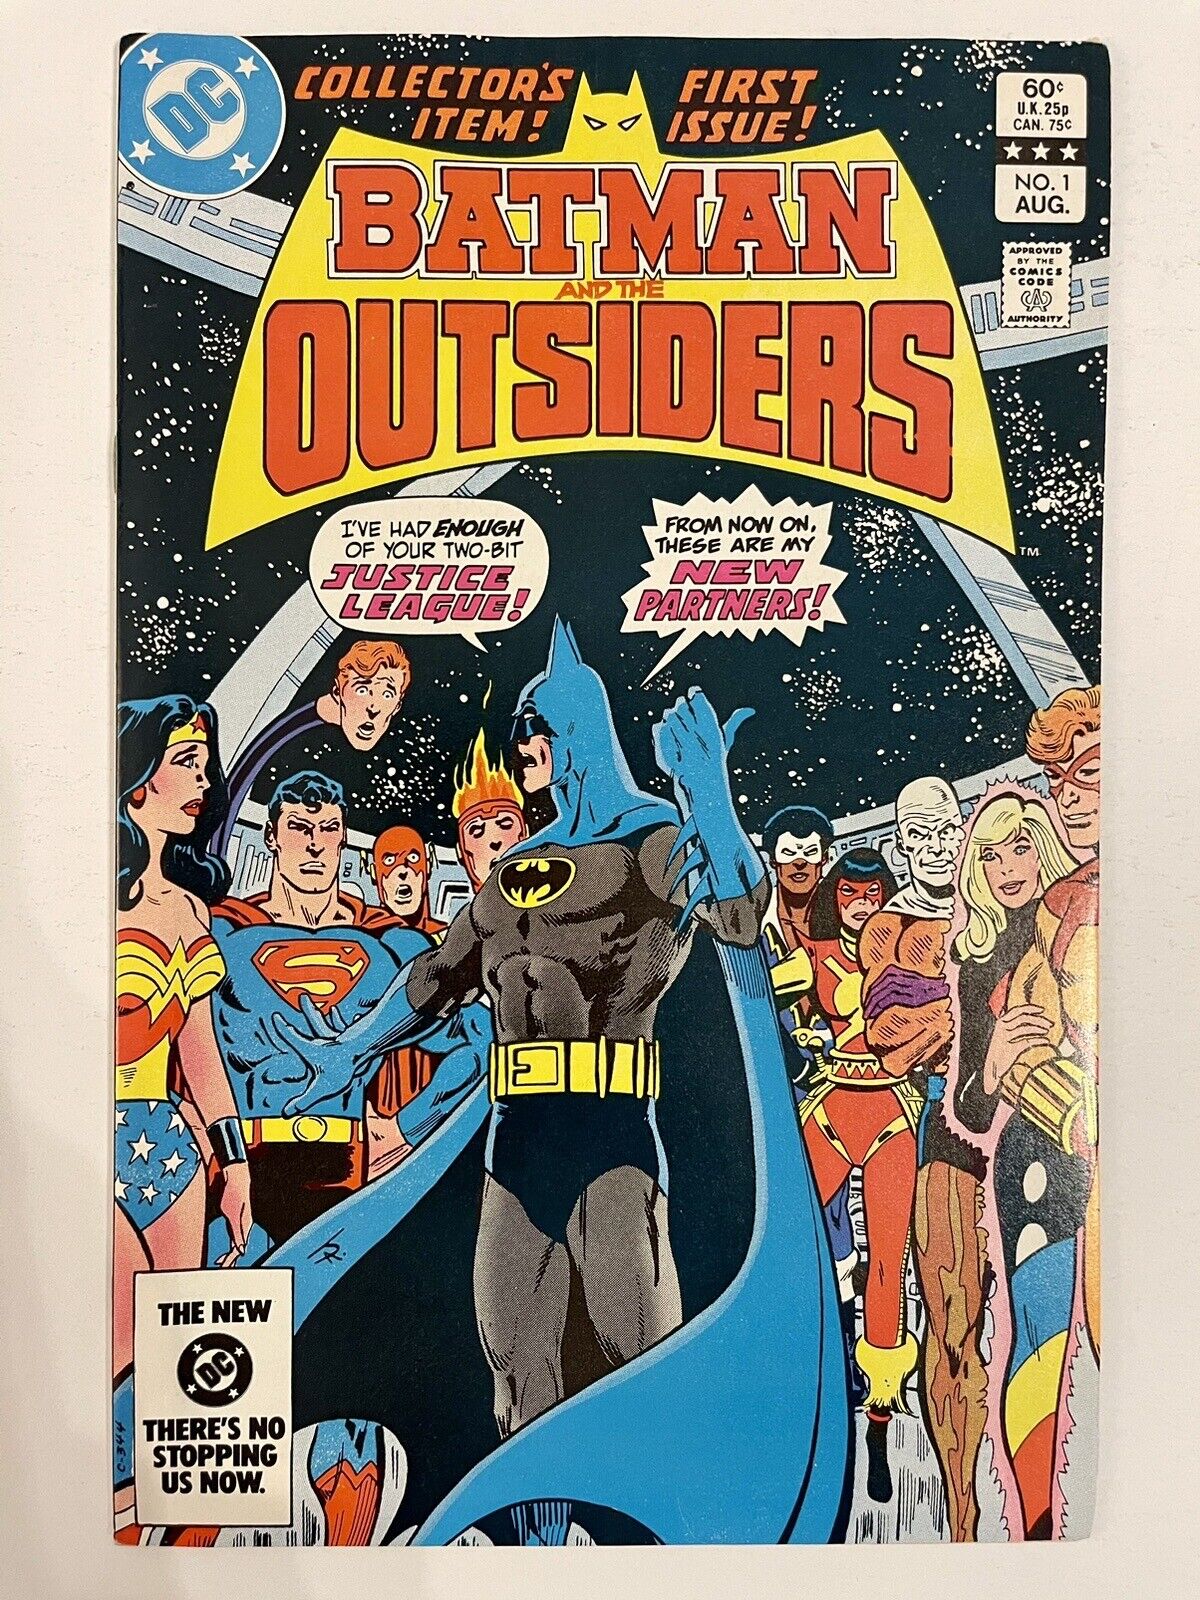 Batman and The Outsiders #1, 1983 Bronze Age DC Comic Book, 1st Appearance